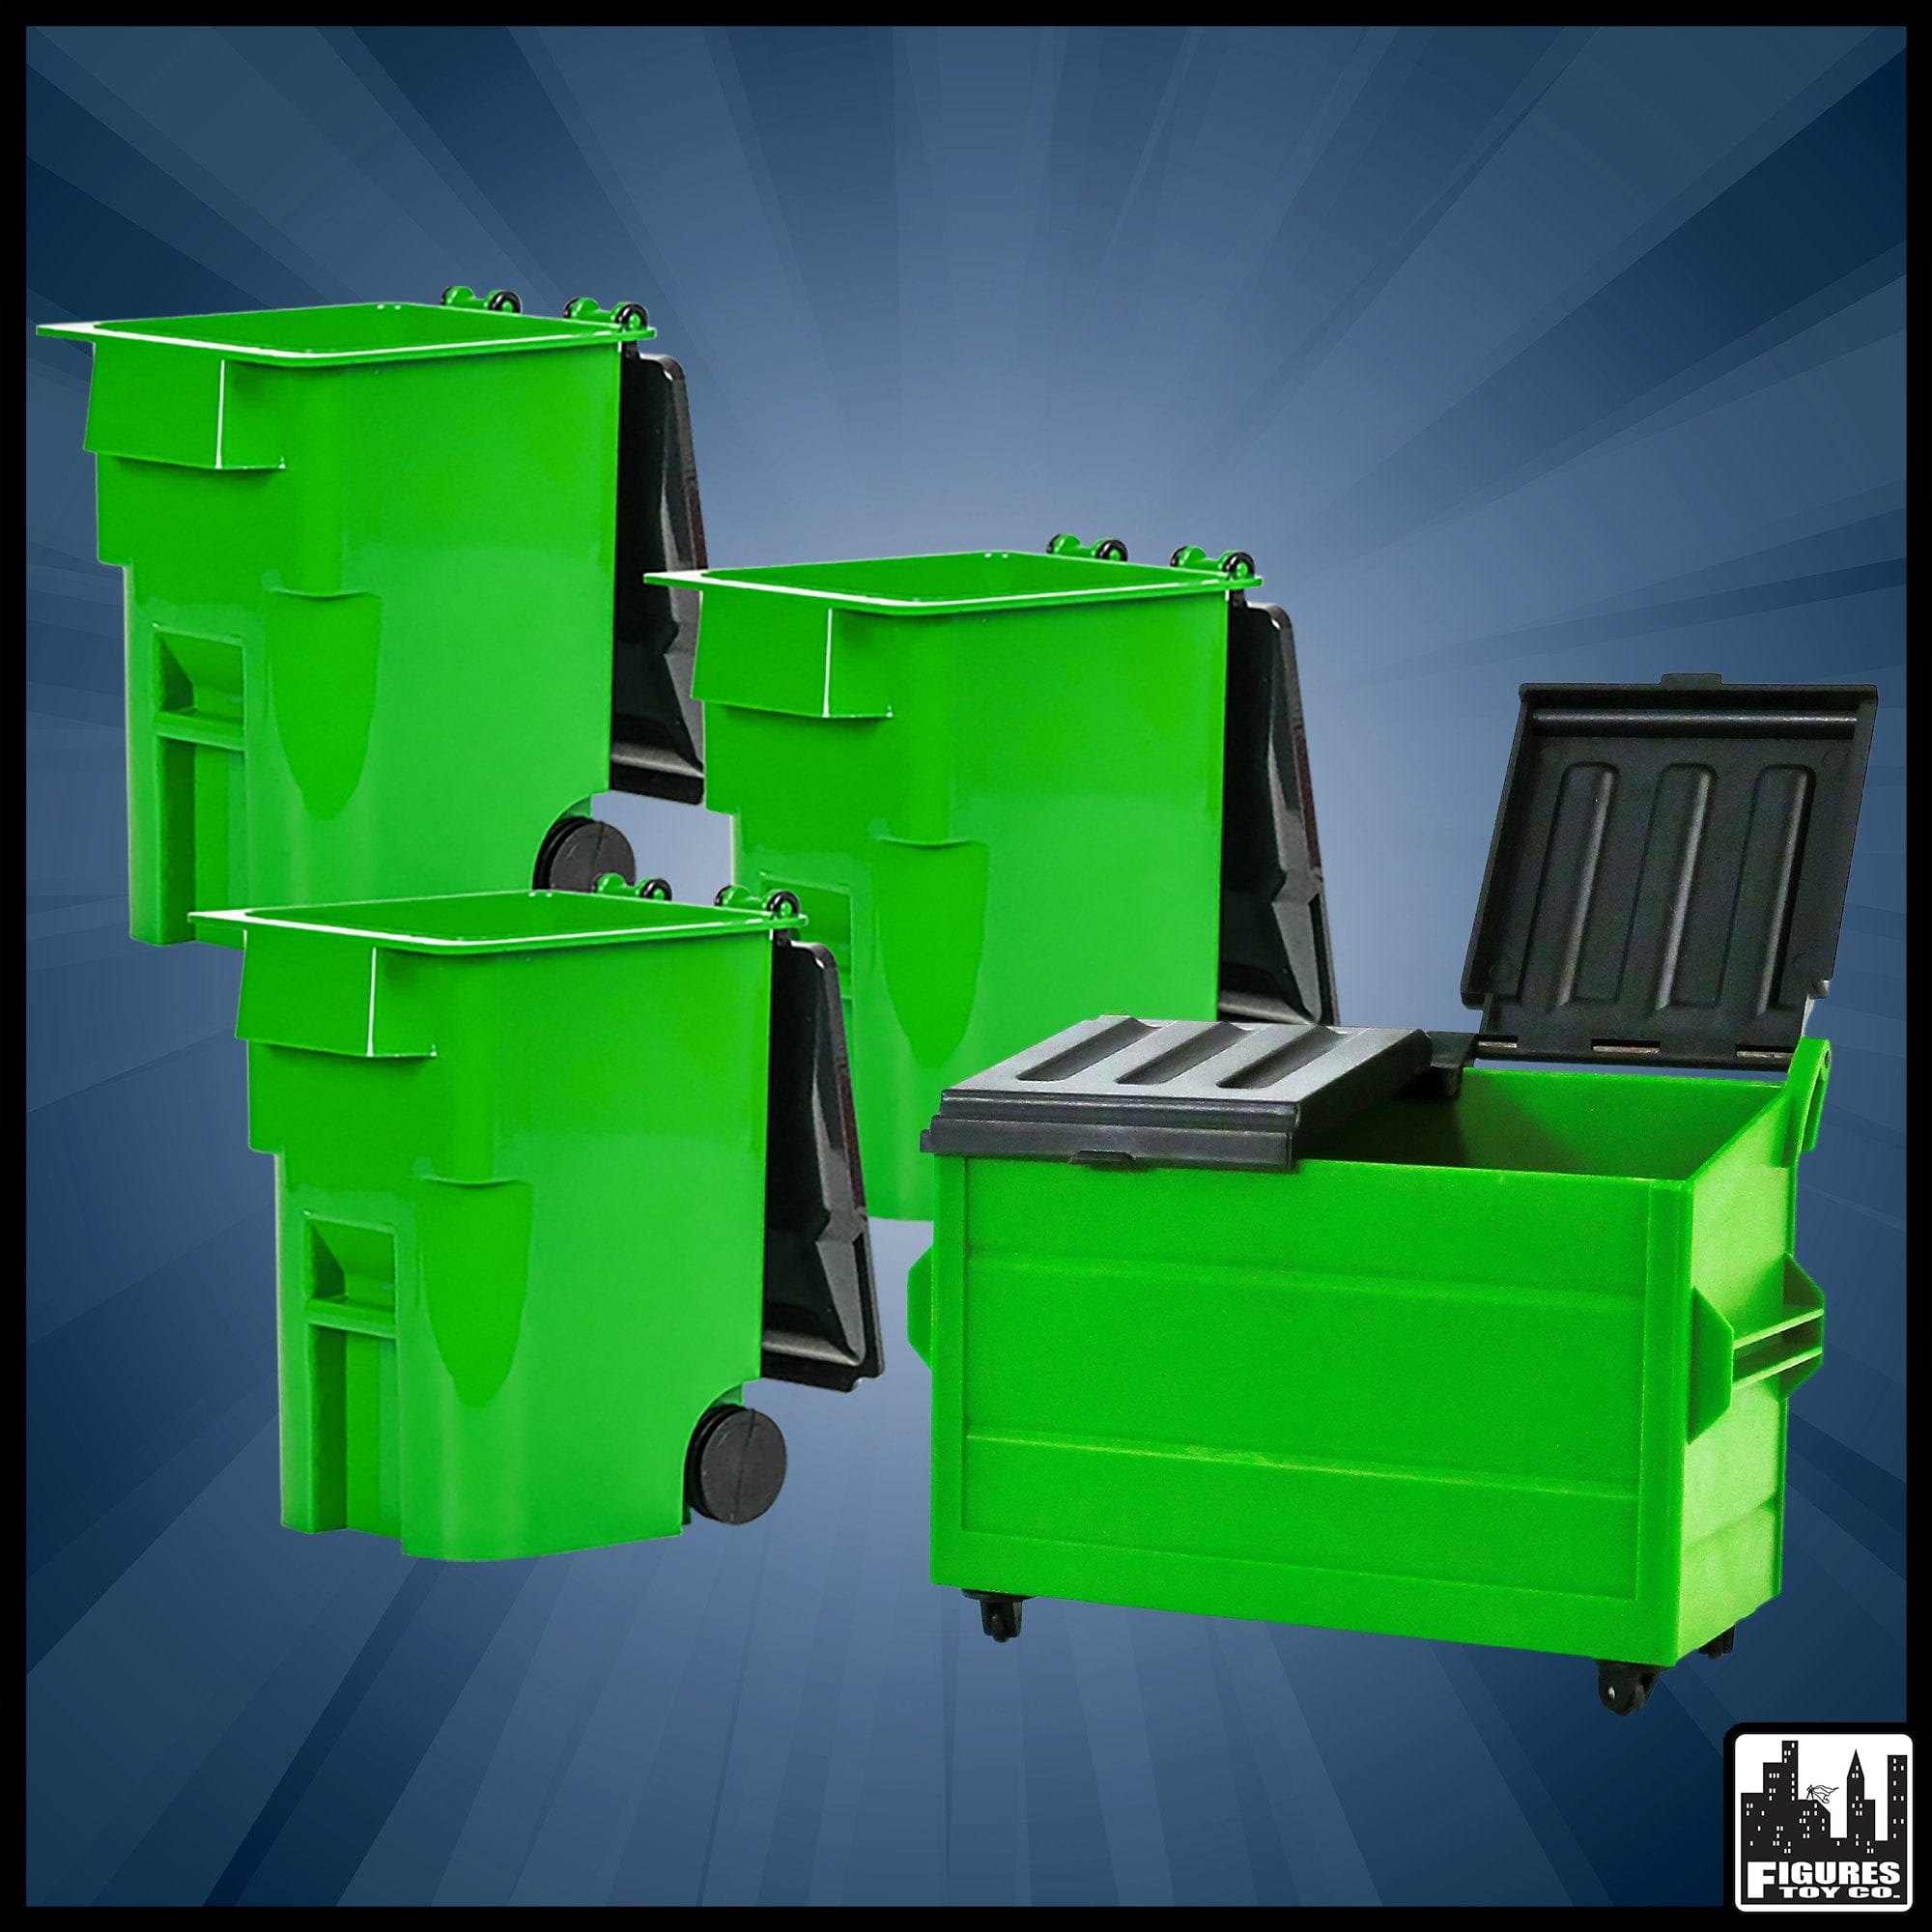 Green Dumpster & 3 Green Trash Cans With Lid & Wheels for WWE Wrestling Action Figures